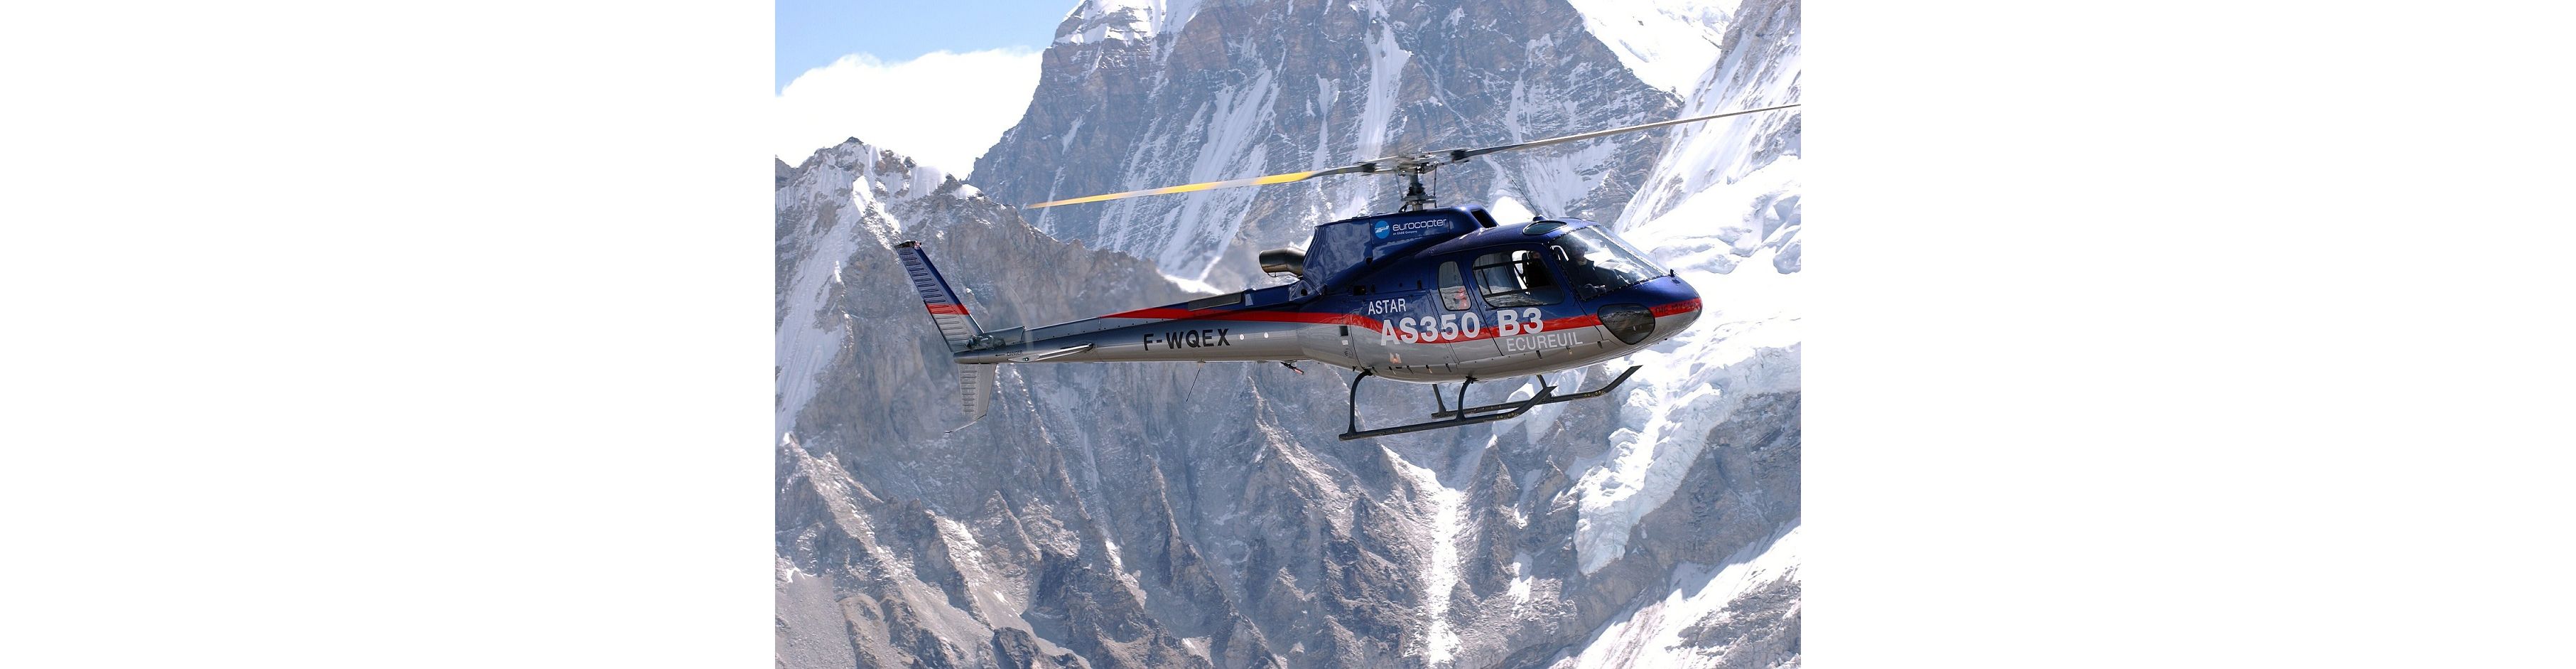 Airbus H125 Helicopters Operating On The Roof Of The World